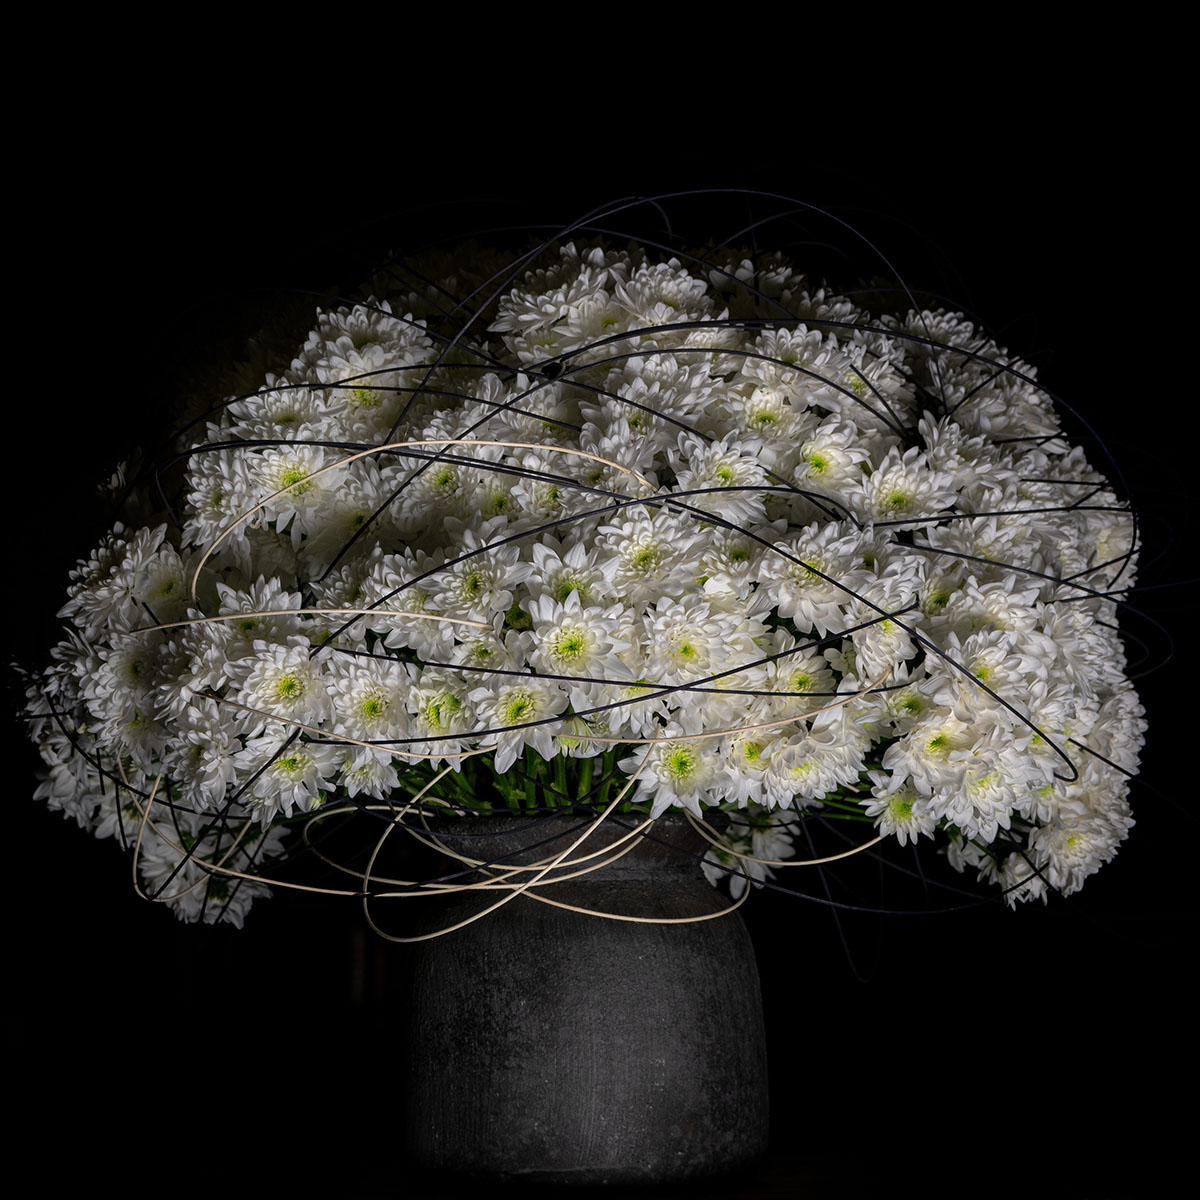 chrysanthemums-in-black-and-white-featured